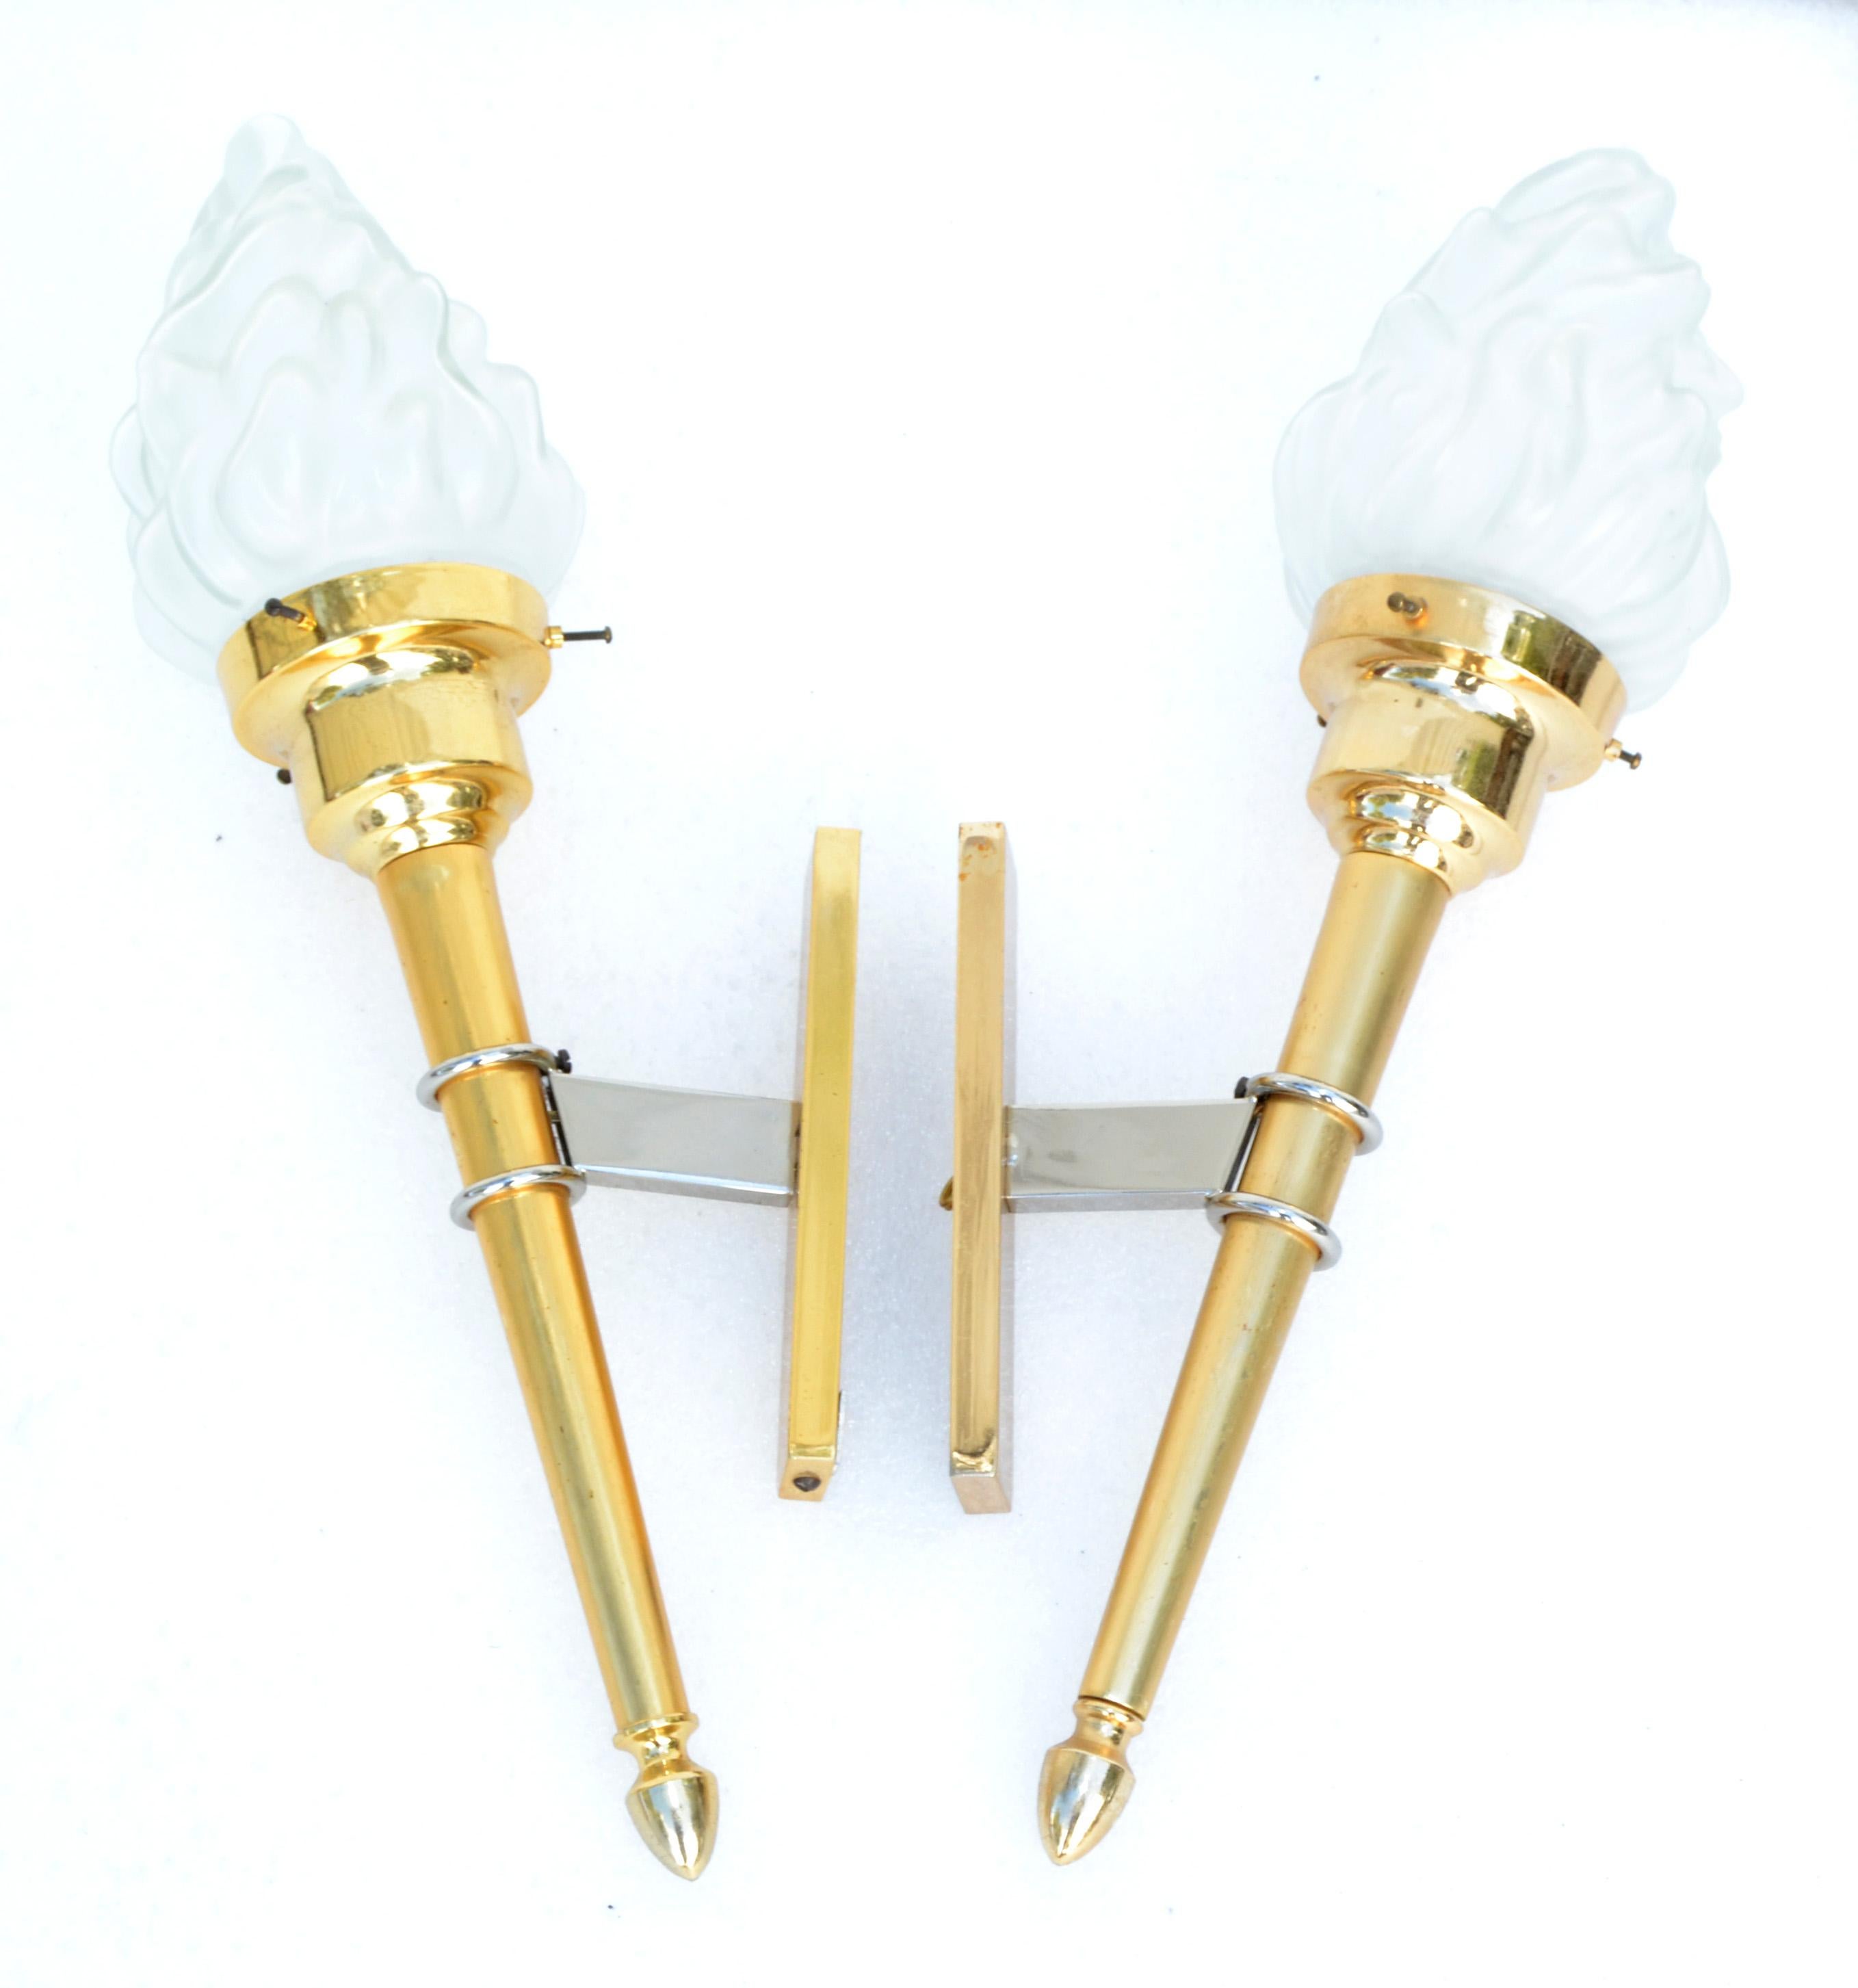 Maison Jansen Style Sconces Brass & Blown Glass Flame Shade France 1950, Pair For Sale 2